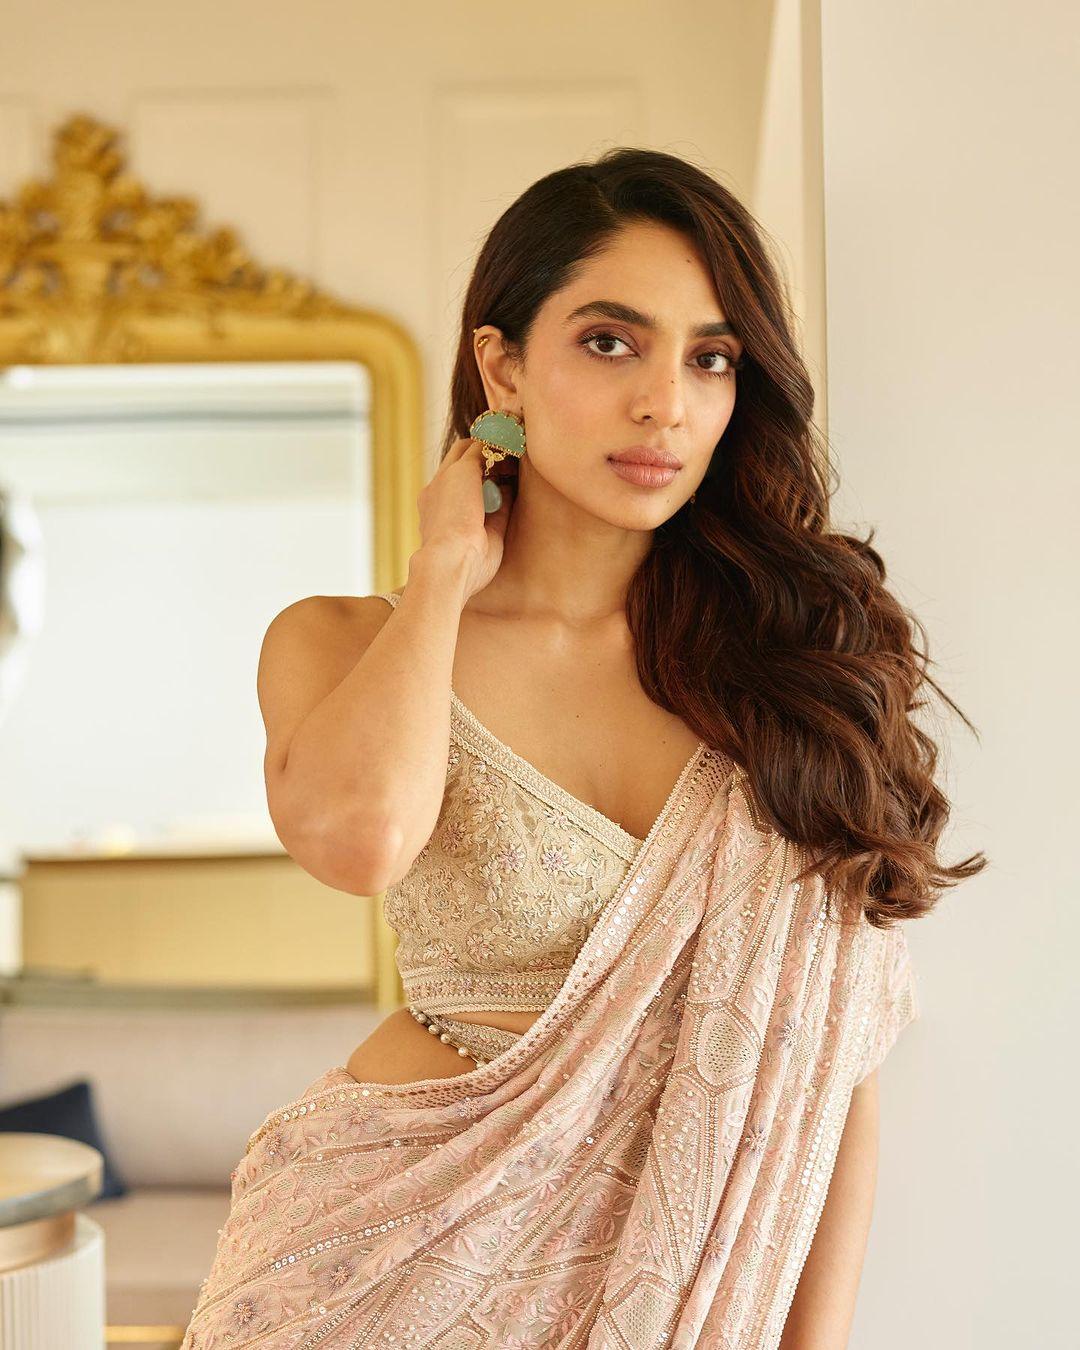 The rose gold hue added a touch of opulence to her look, while the intricate detailing on the saree reflected her keen eye for style.